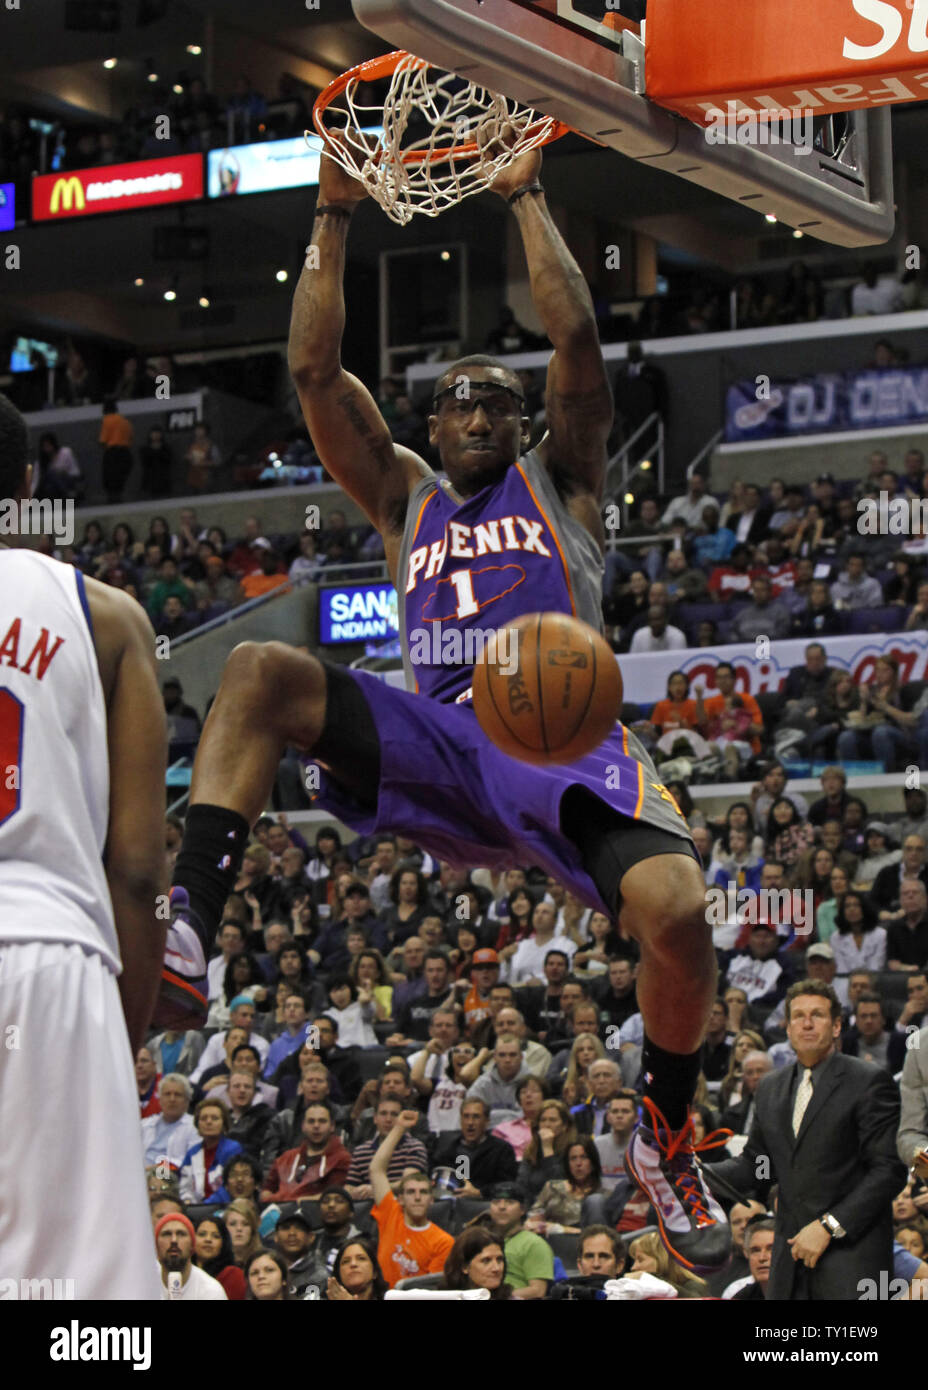 Phoenix Suns forward Amar'e Stoudemire dunks during the first quarter of the game against the Los Angeles Clippers at the Staples Center in Los Angeles on March 3, 2010.  Phoenix beat Los Angeles 127-101.   UPI/David Silpa Stock Photo